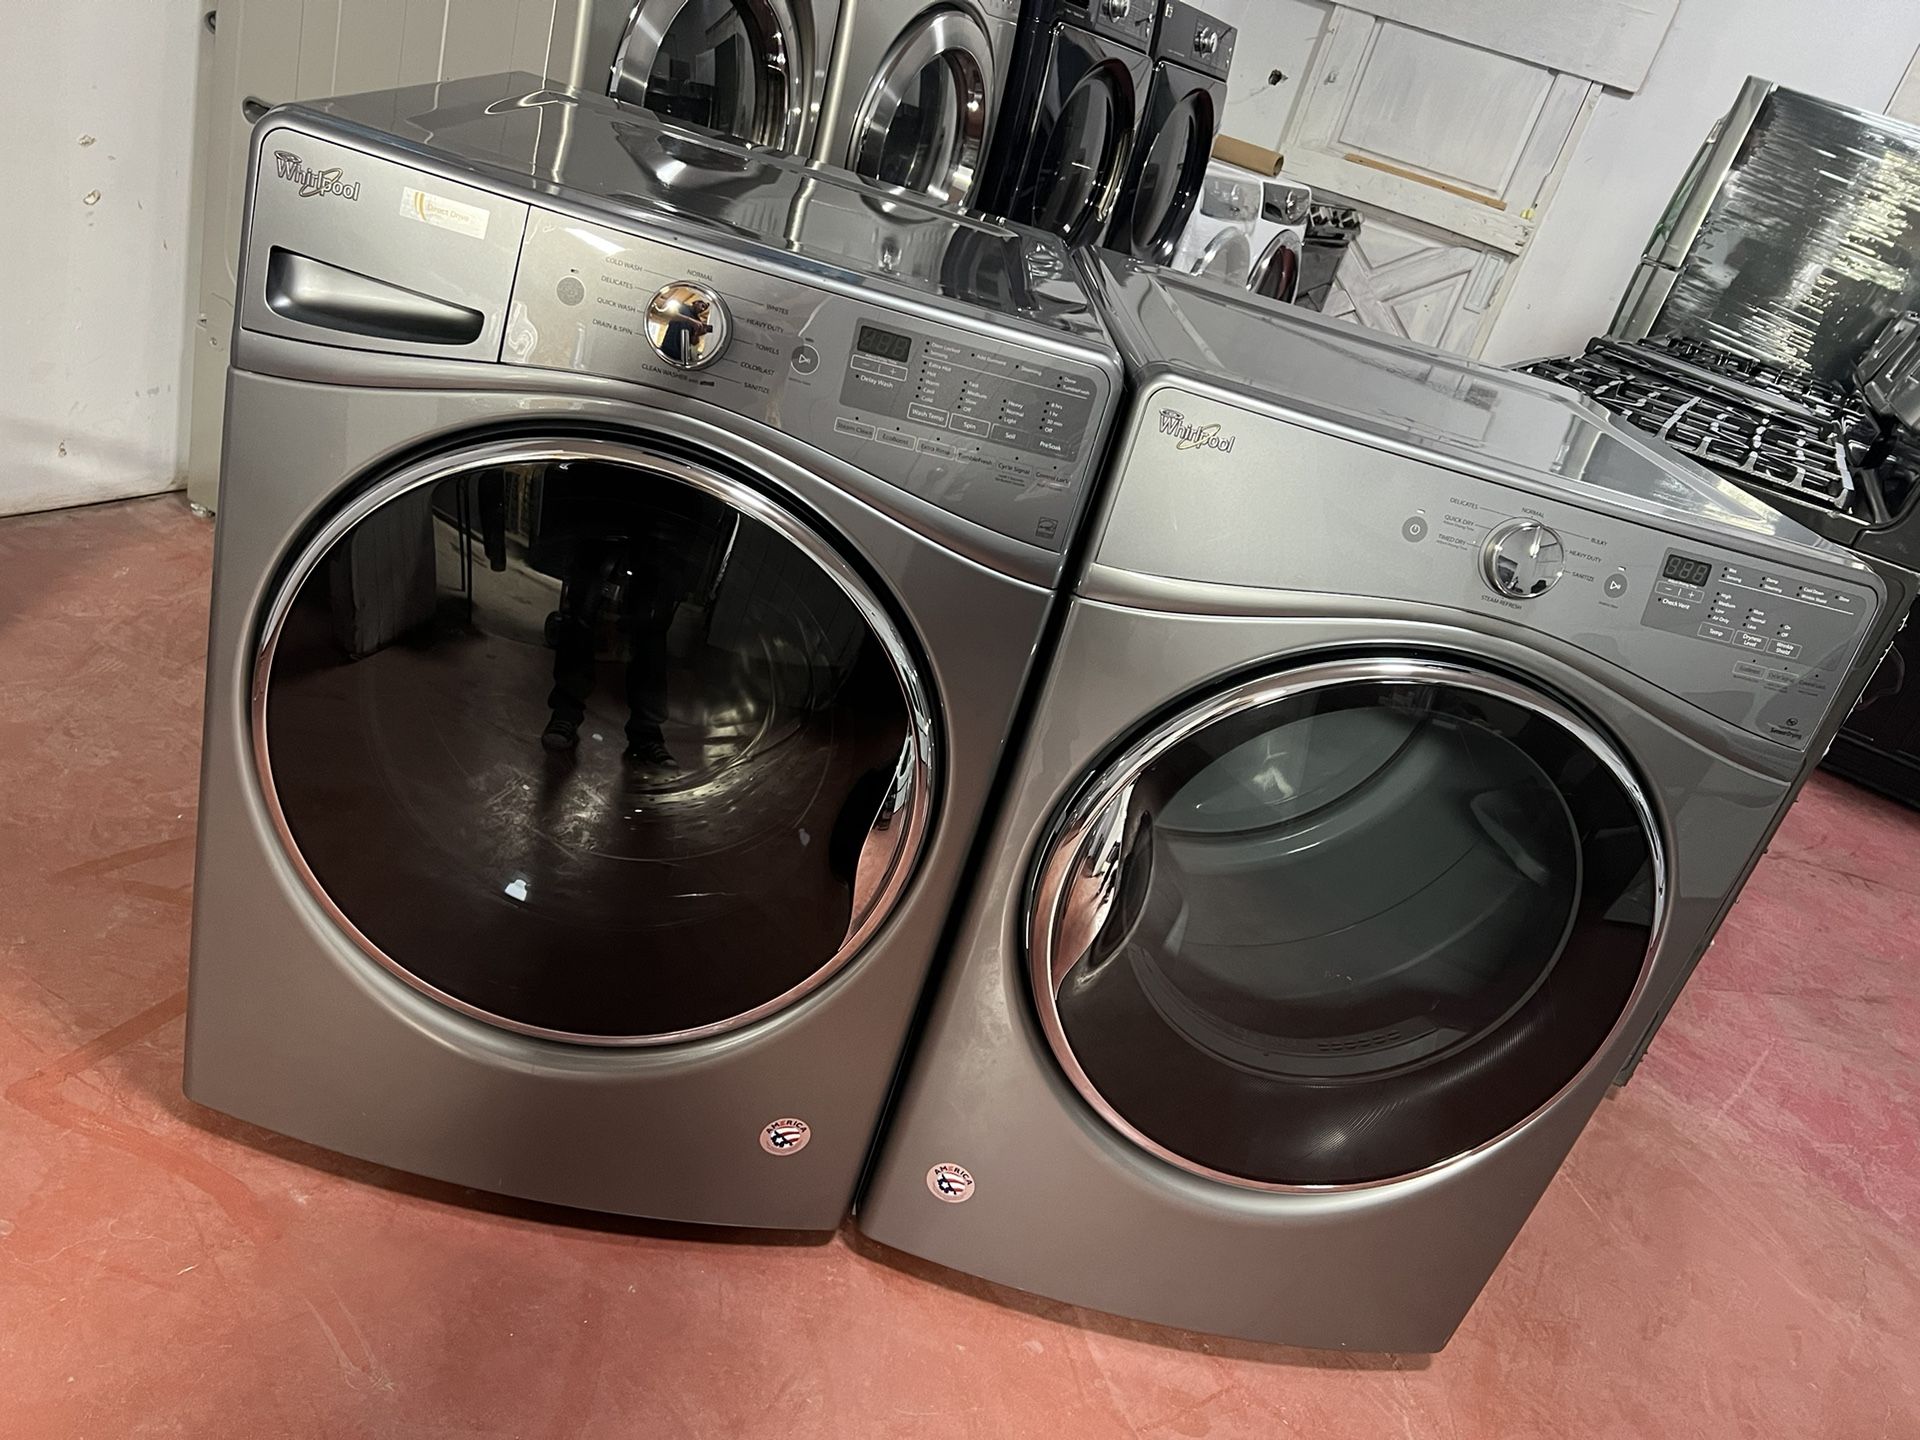 whirlpool washing machine set gas dryer in perfect condition working at 💯 washing machine capacity 4.5 dryer 7.4 delivered to your home and installed